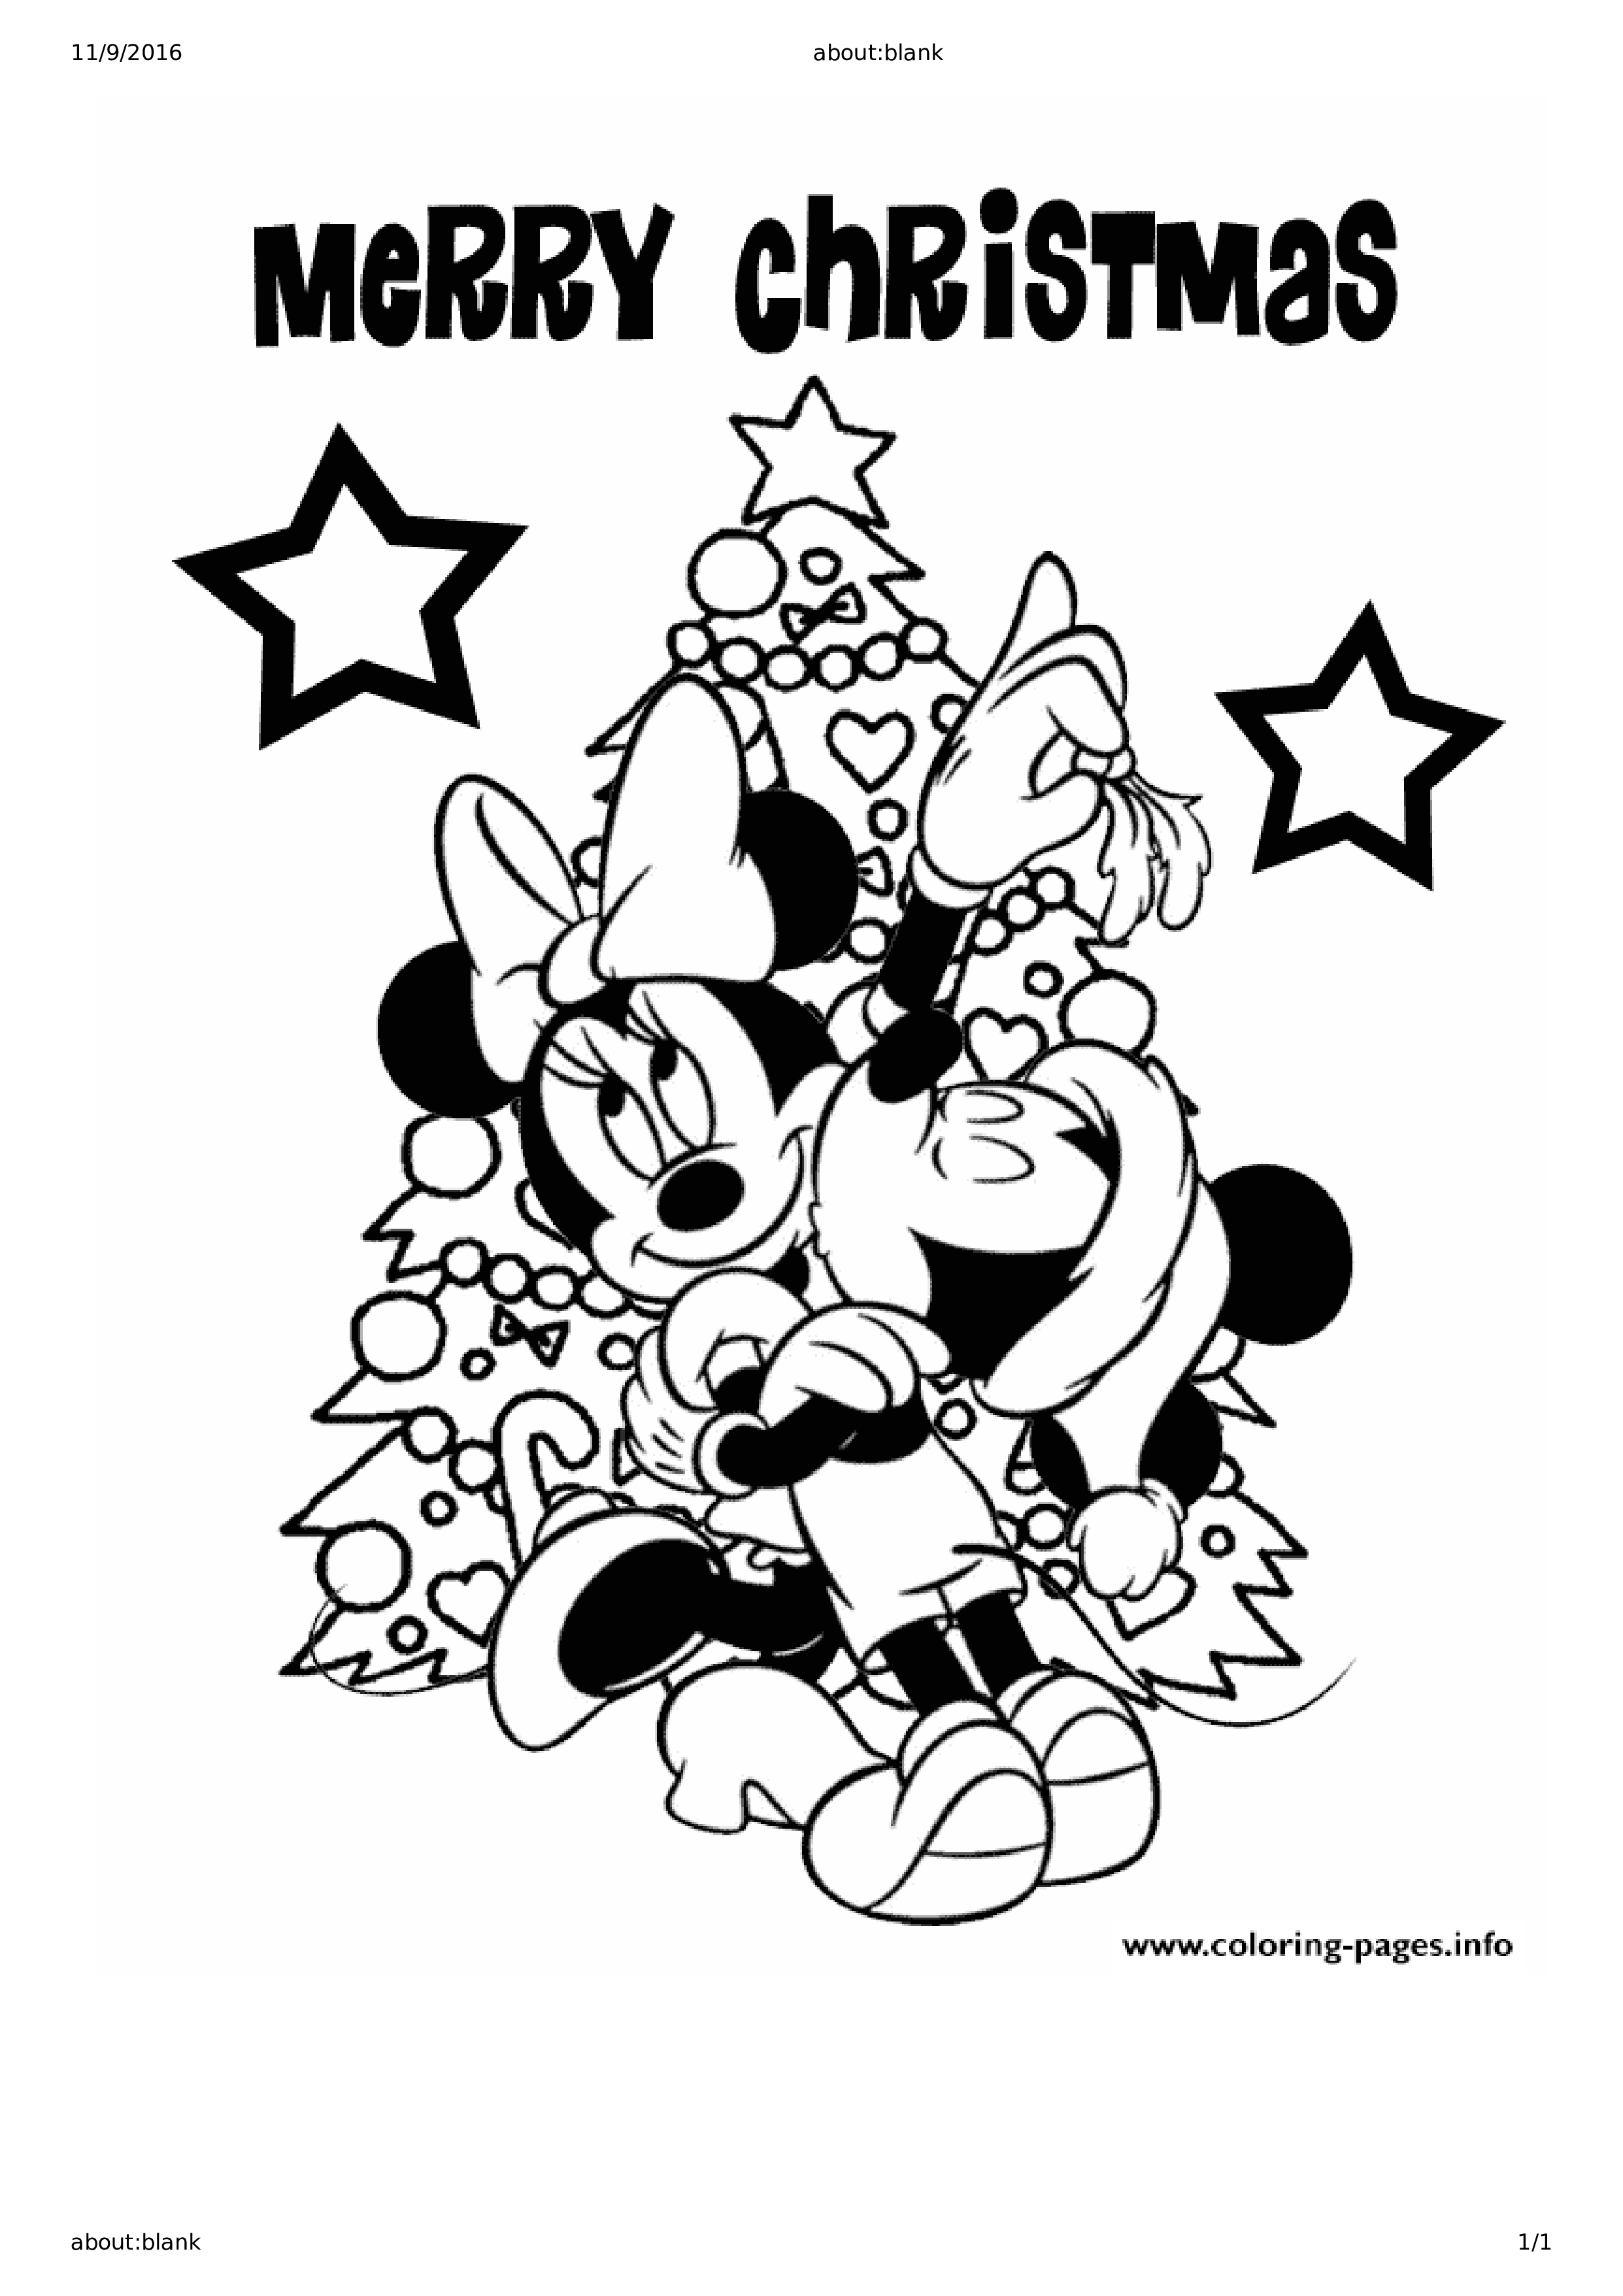 colouring templates christmas 159 best dibujos carson dellosa images on pinterest christmas templates colouring 